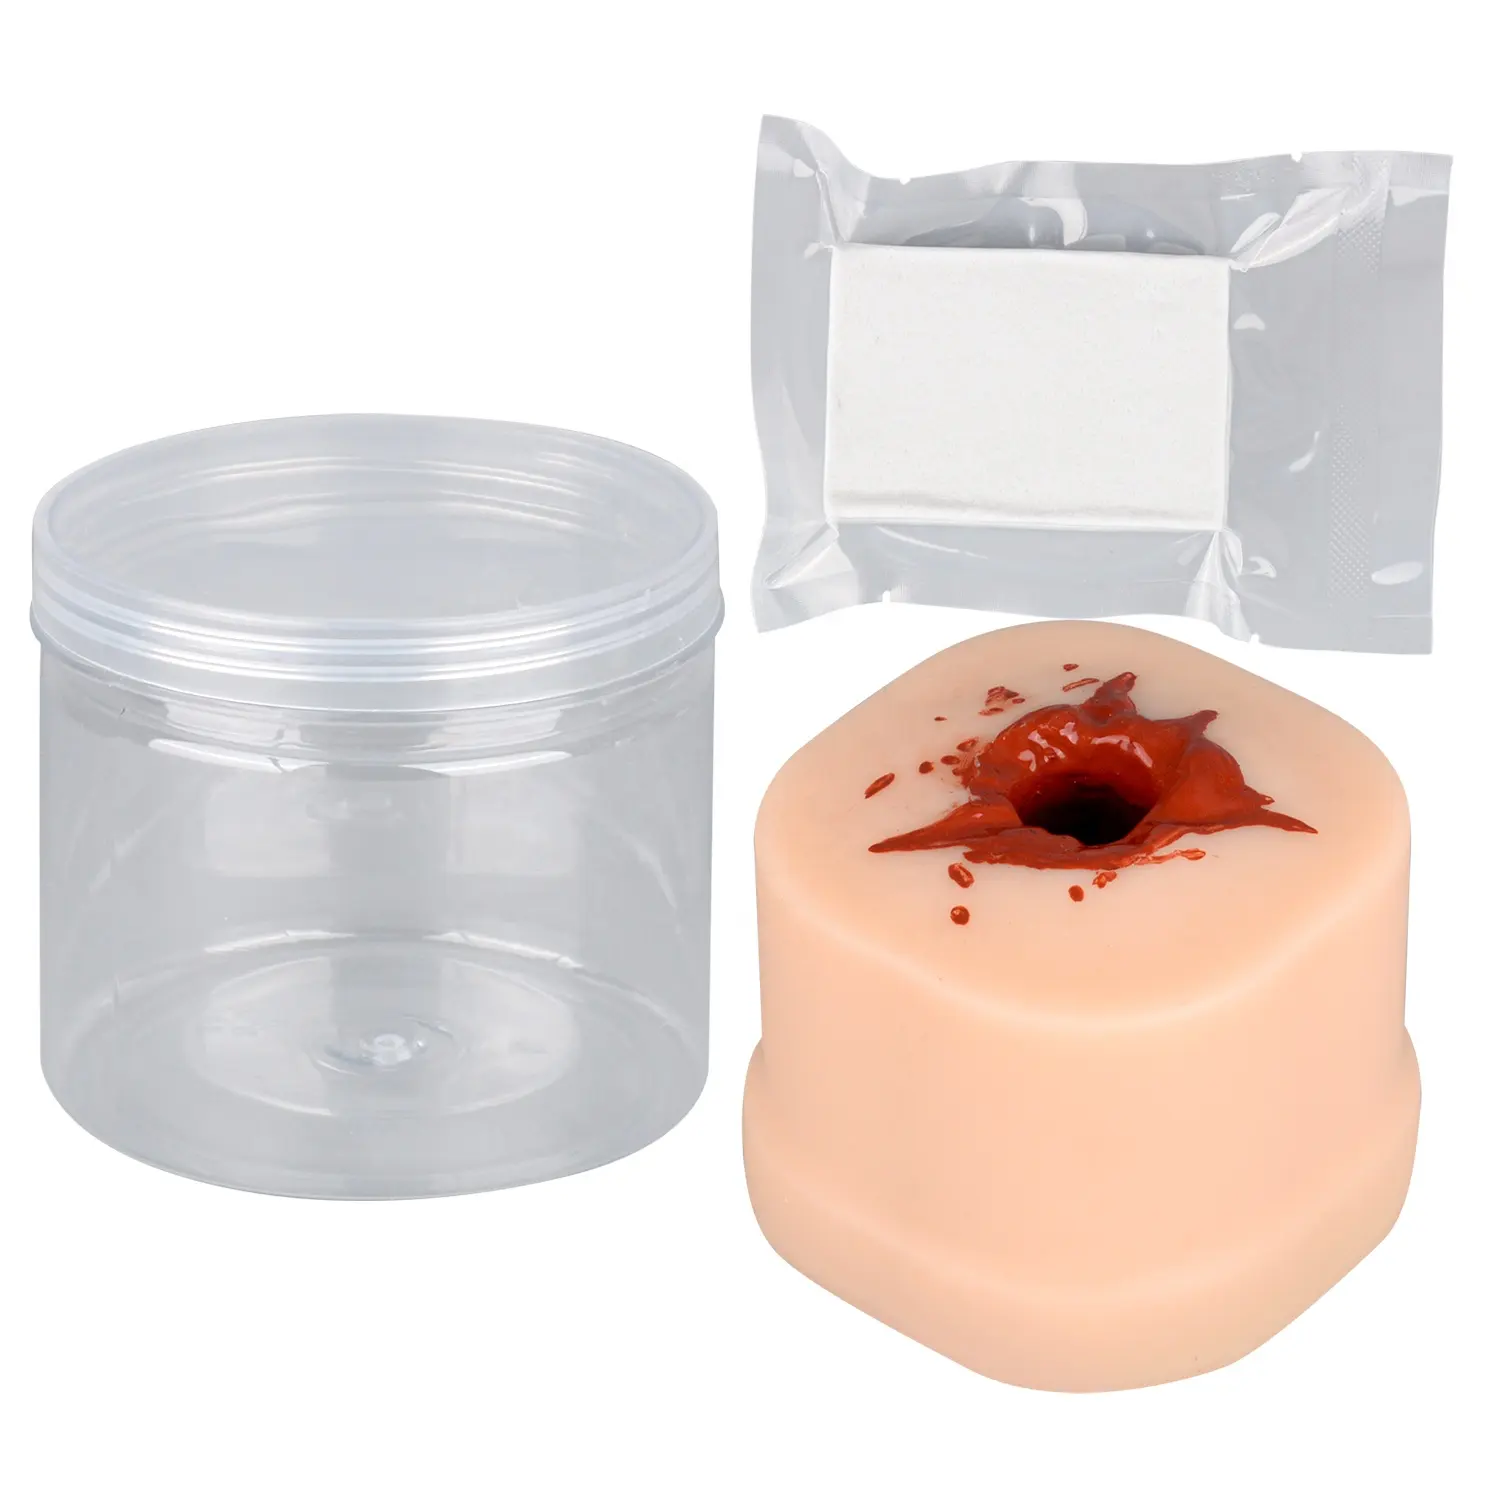 TCCC course Wound Pack Trainer Wound Dressing Pack Model for Tactical Combat Casualty Care